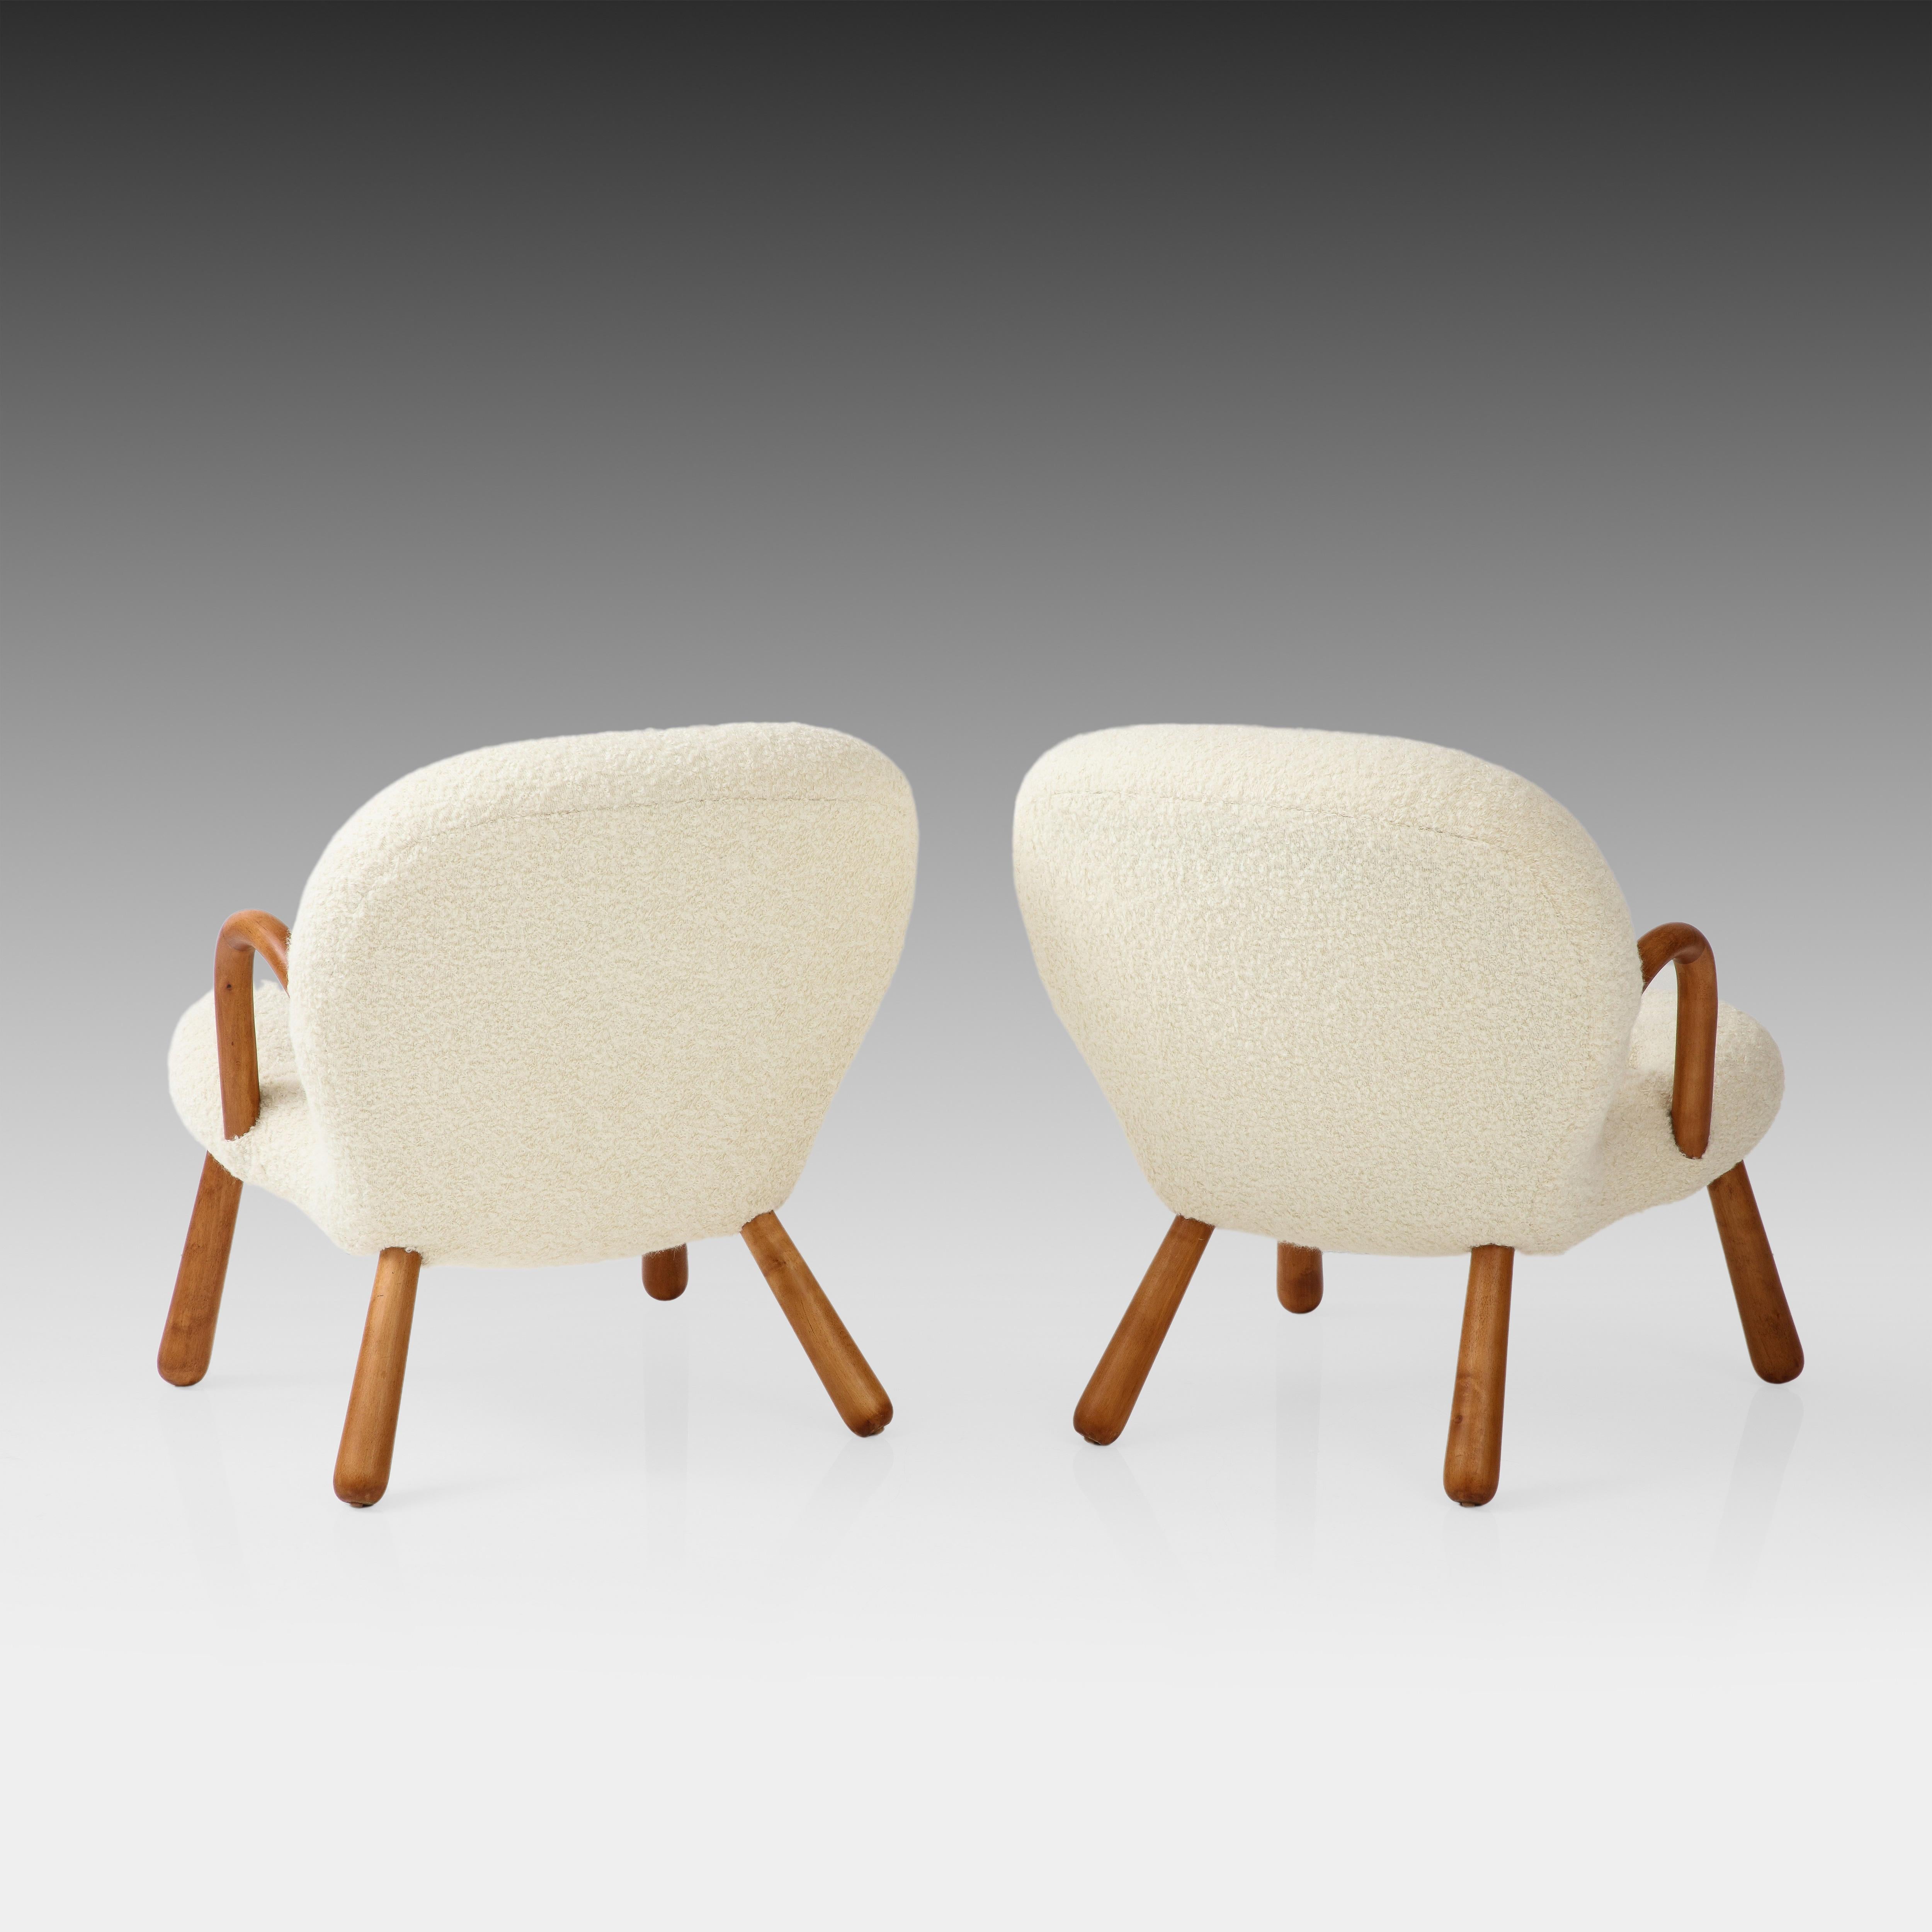 Mid-20th Century Arnold Madsen for Madsen & Schubell Rare Pair of Clam Chairs, Denmark, 1944 For Sale